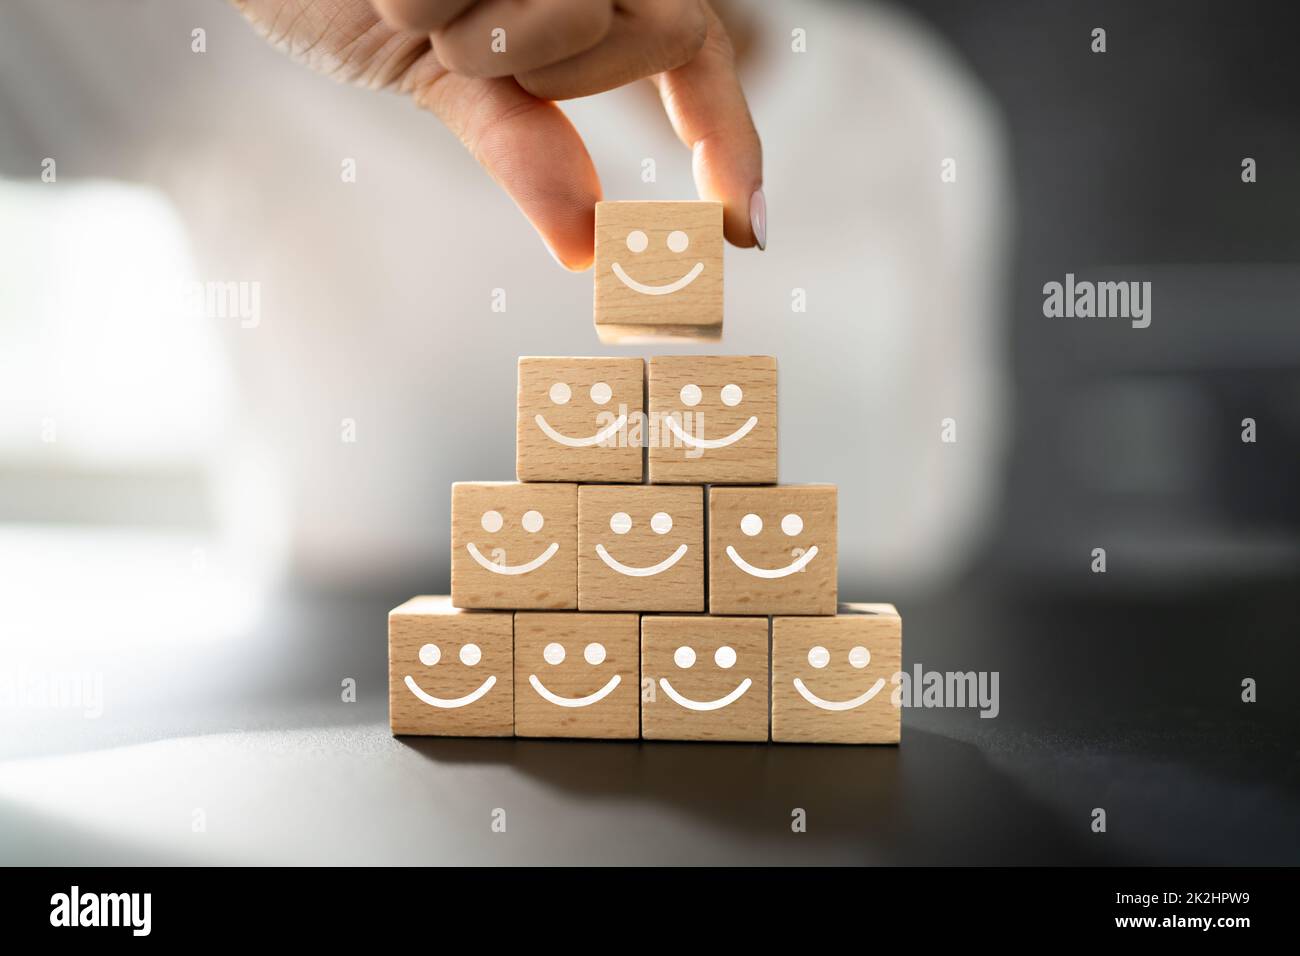 Employee Satisfaction Experience And Client Centric Concept Stock Photo